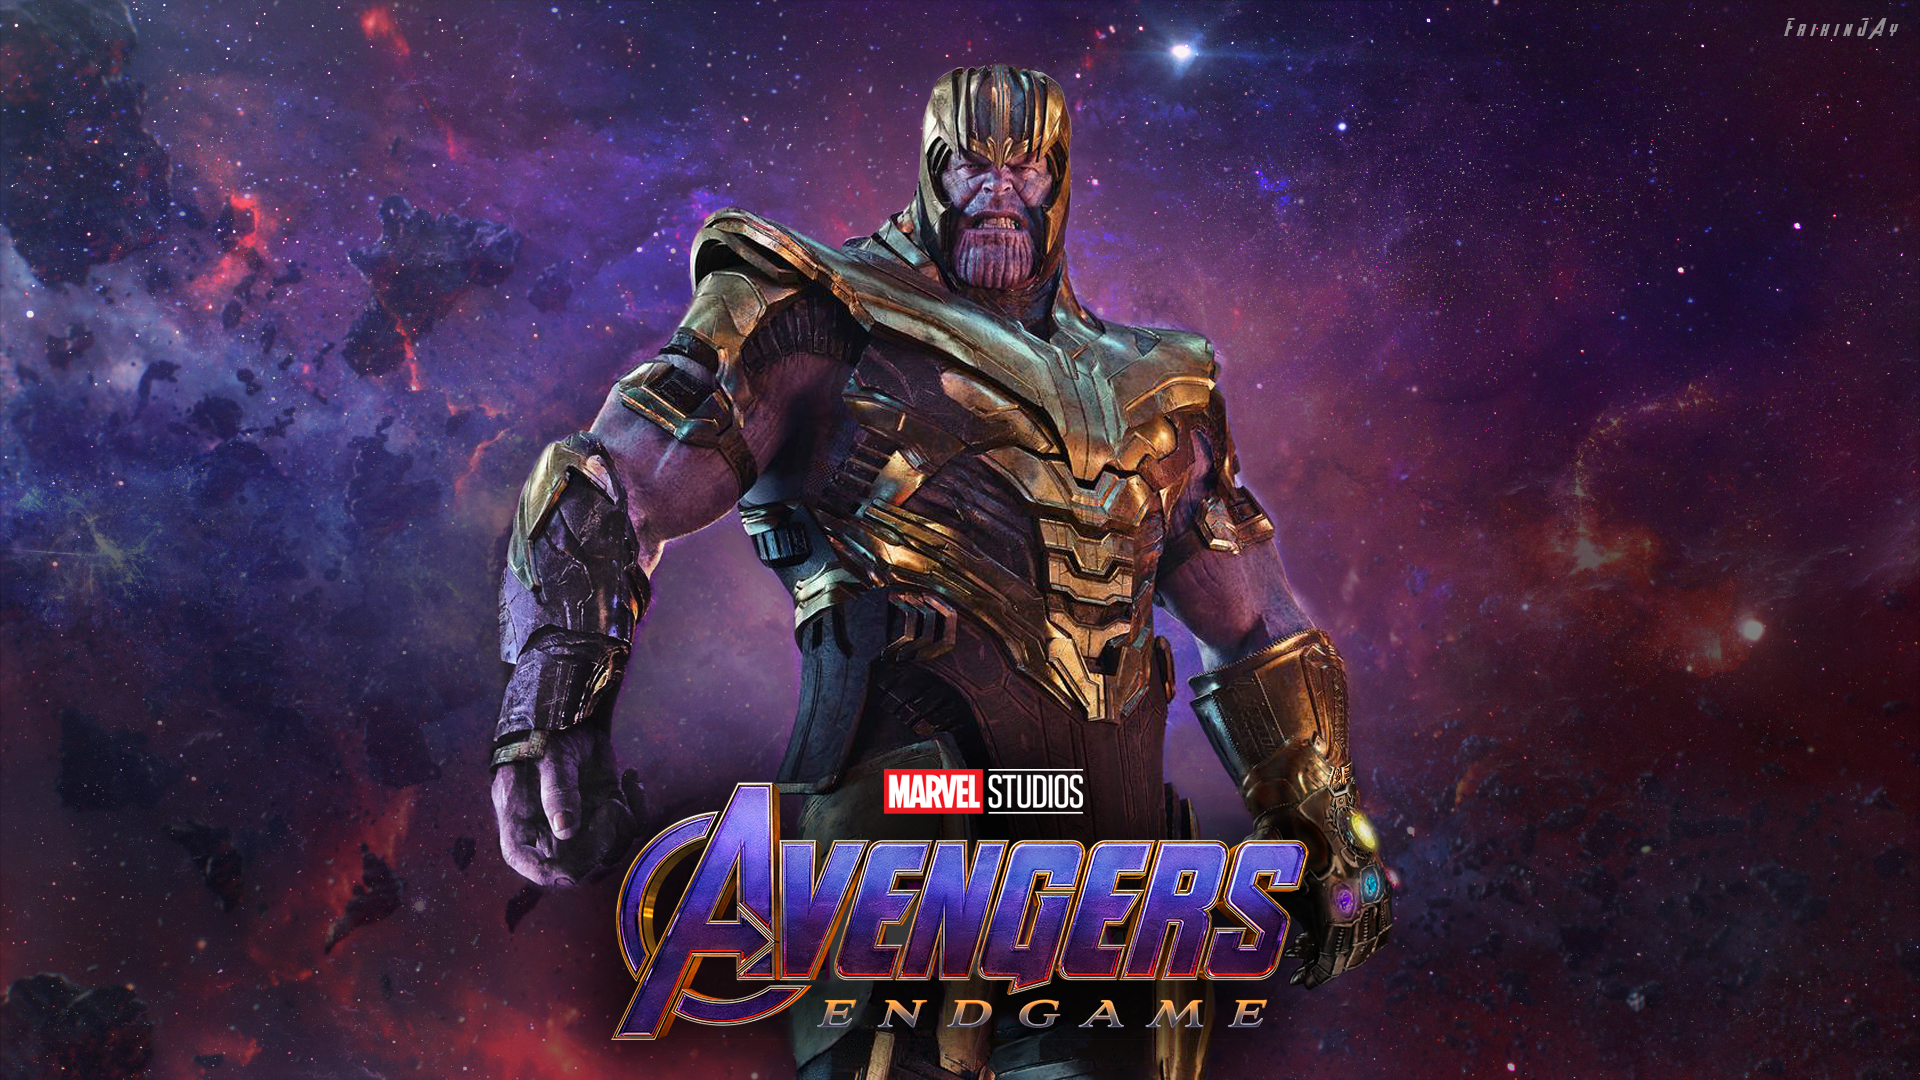 Free download As requested Endgame Thanos Wallpaper Need more let me know in [1920x1080] for your Desktop, Mobile & Tablet. Explore Thanos Endgame Wallpaper. Thanos Endgame Wallpaper, Endgame Wallpaper